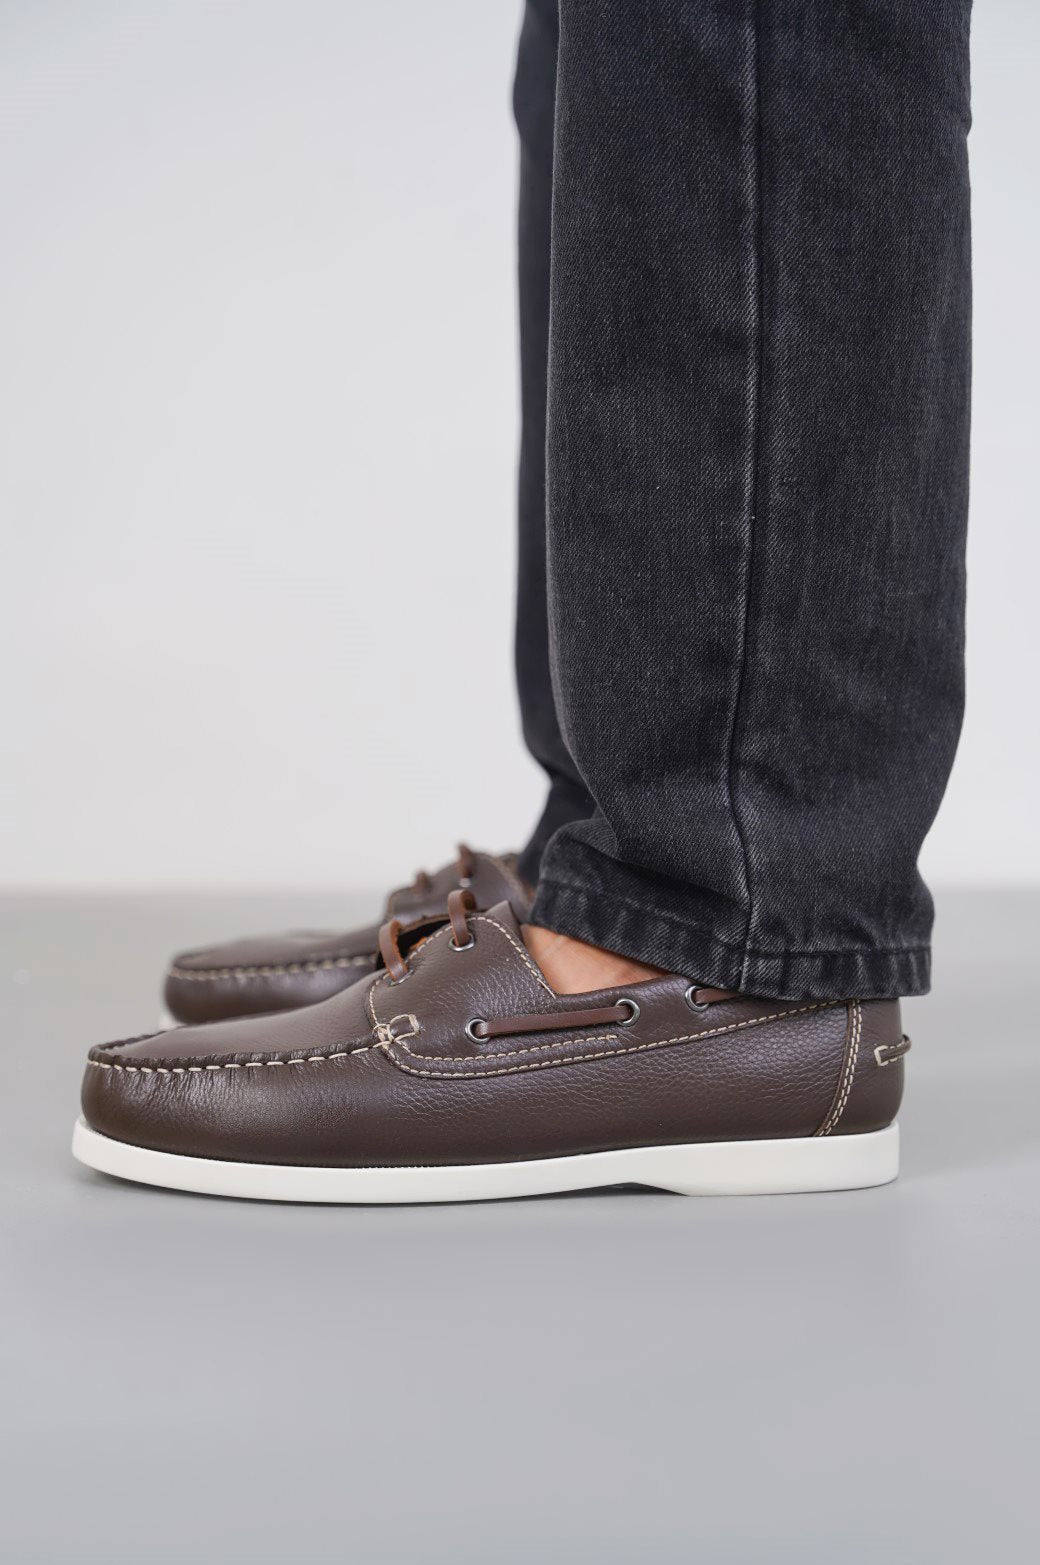 DARK BROWN CLASSIC BOAT SHOES